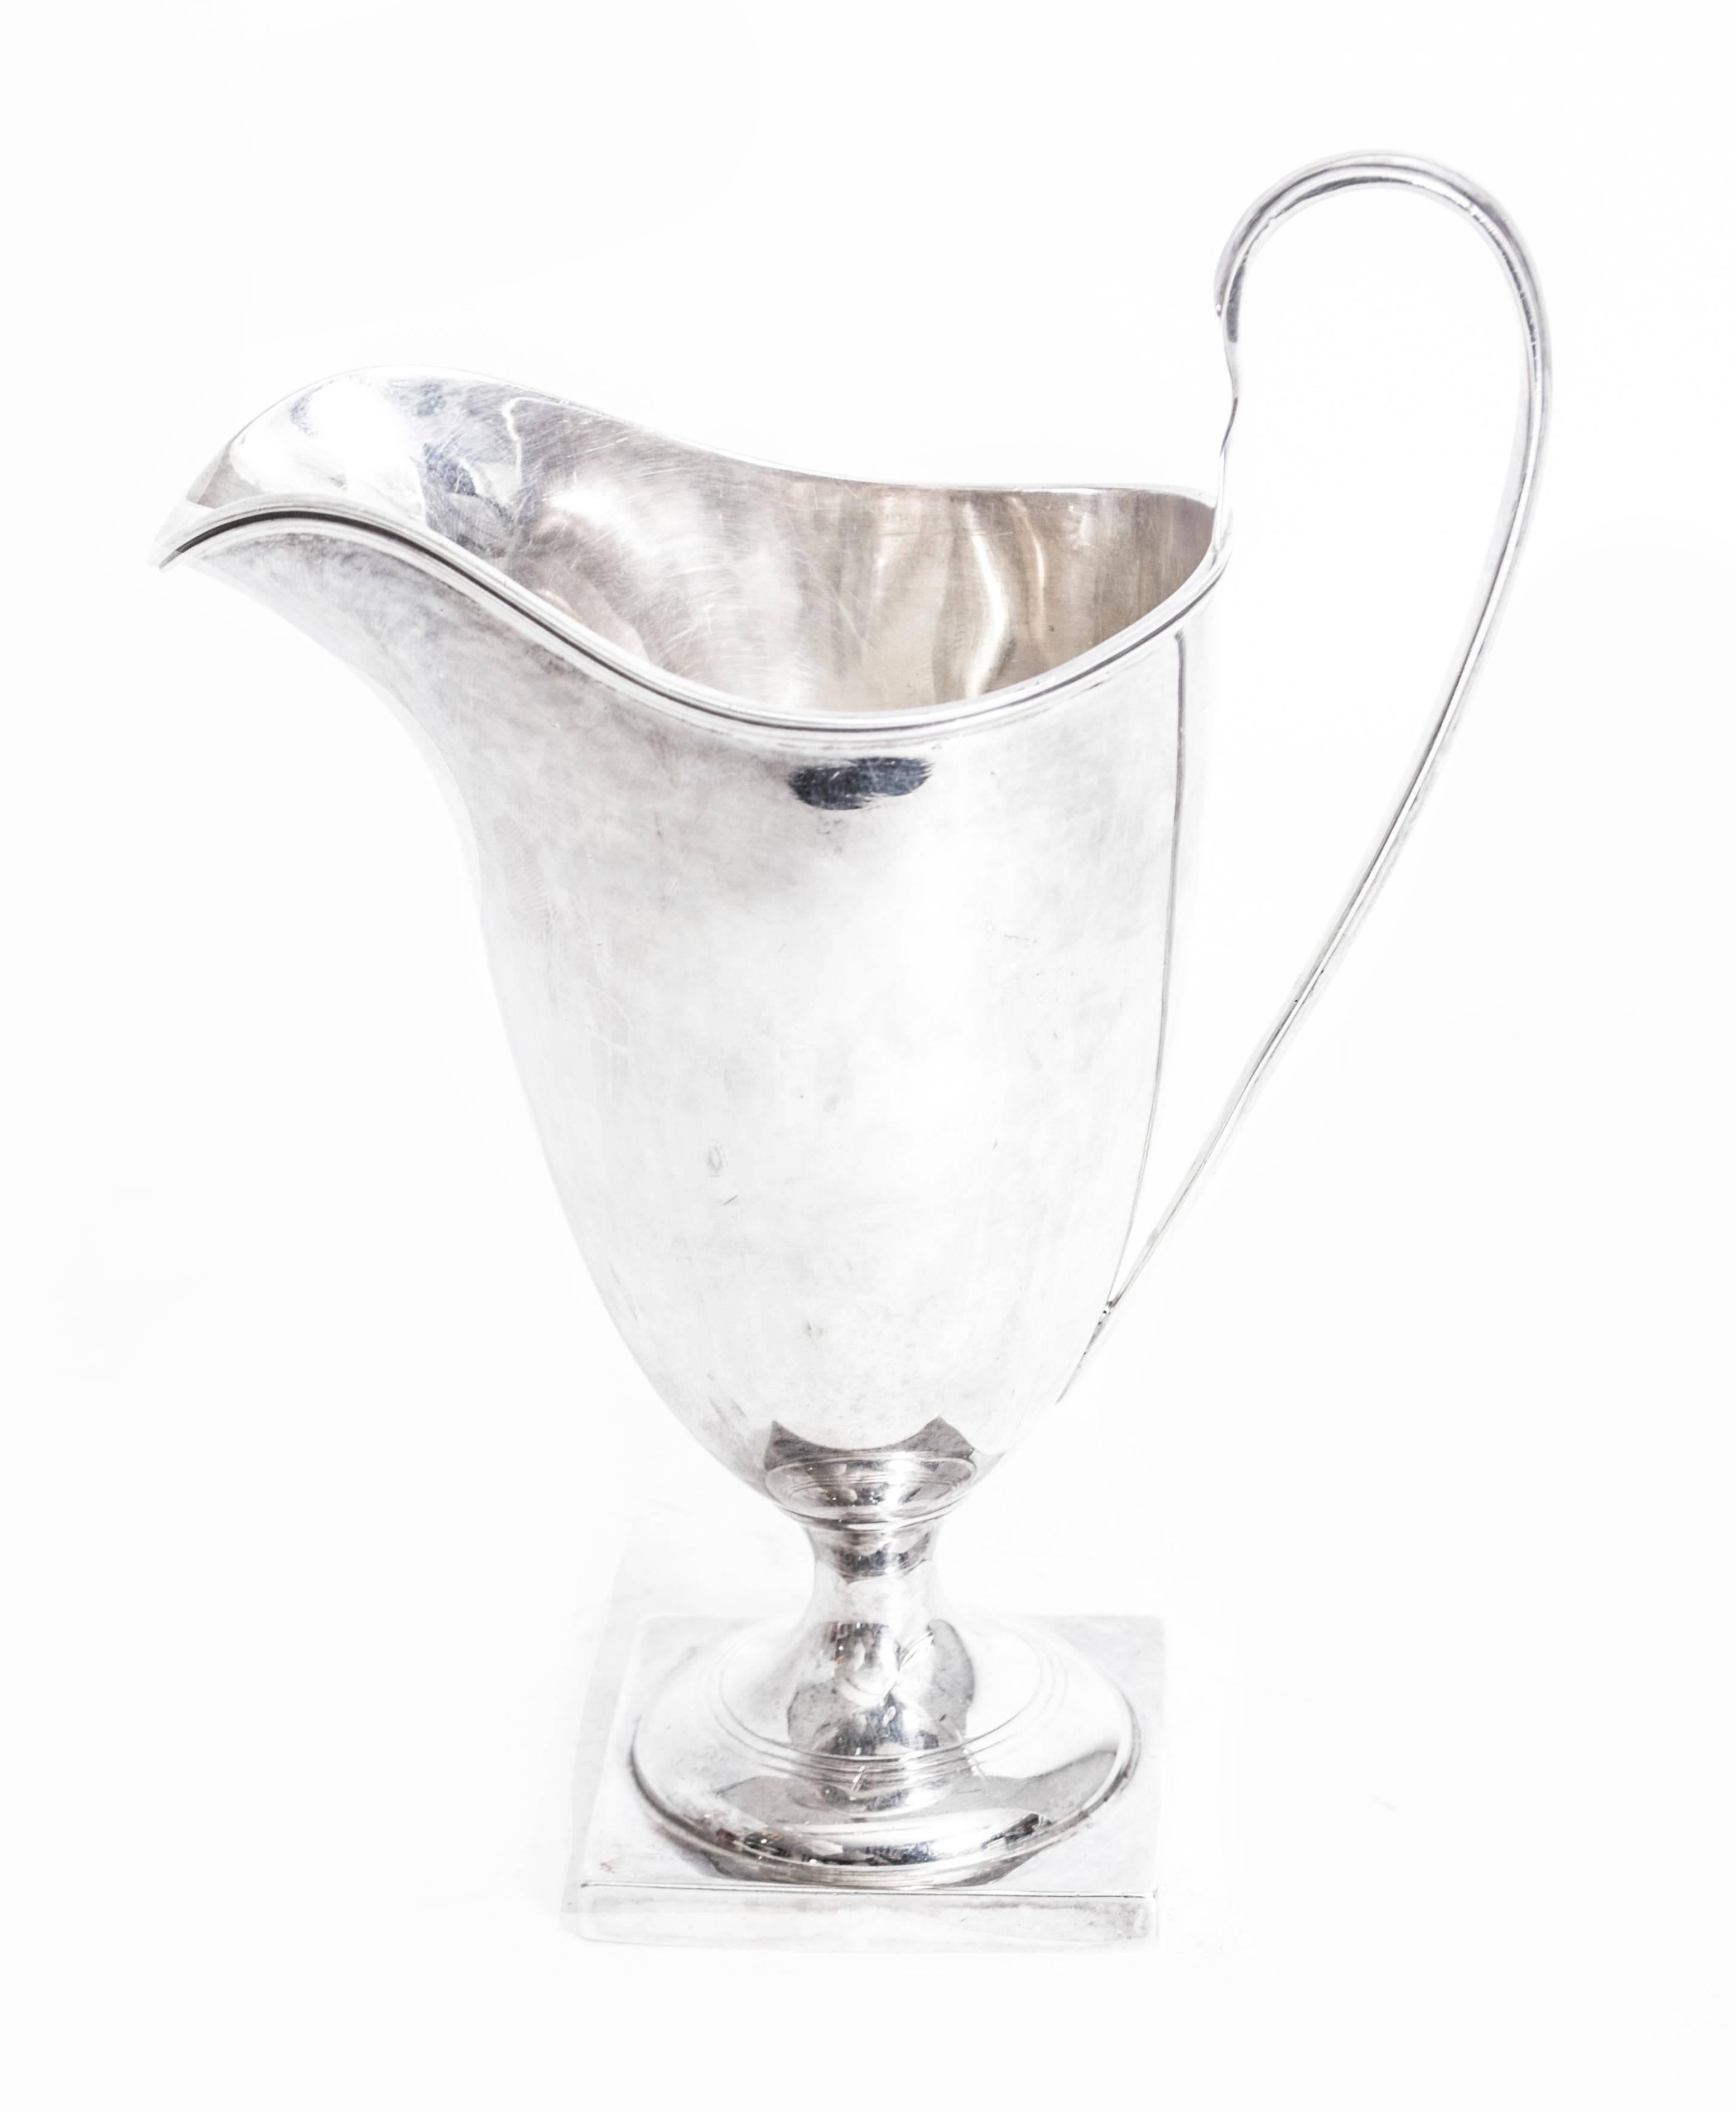 This is an exquisite antique Edwardian sterling silver helmet shaped cream jug with hallmarks for Chester 1906 and the makers mark of the renowned silversmiths George Nathan & Ridley Hayes.

There is no mistaking its unique quality and design, which